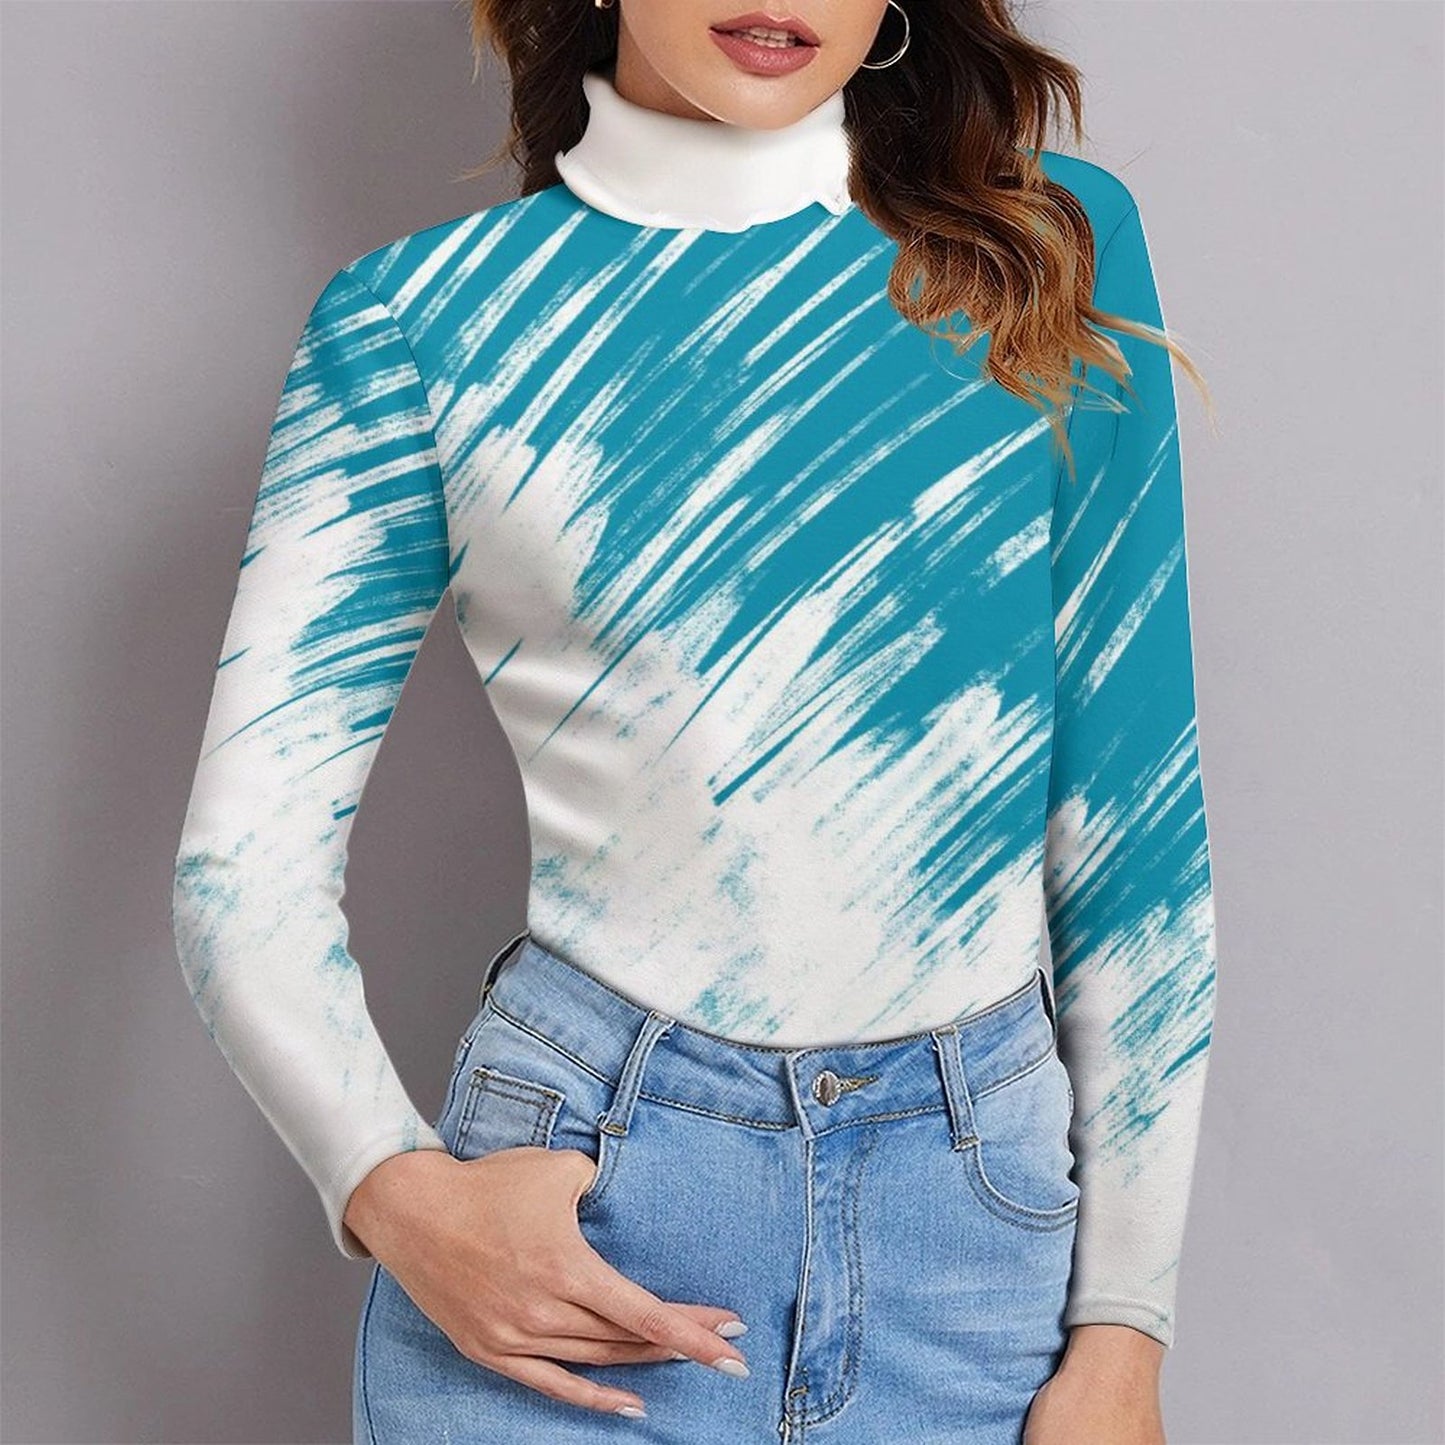 Online DIY Casual Wear for Women Turtleneck Blue And White